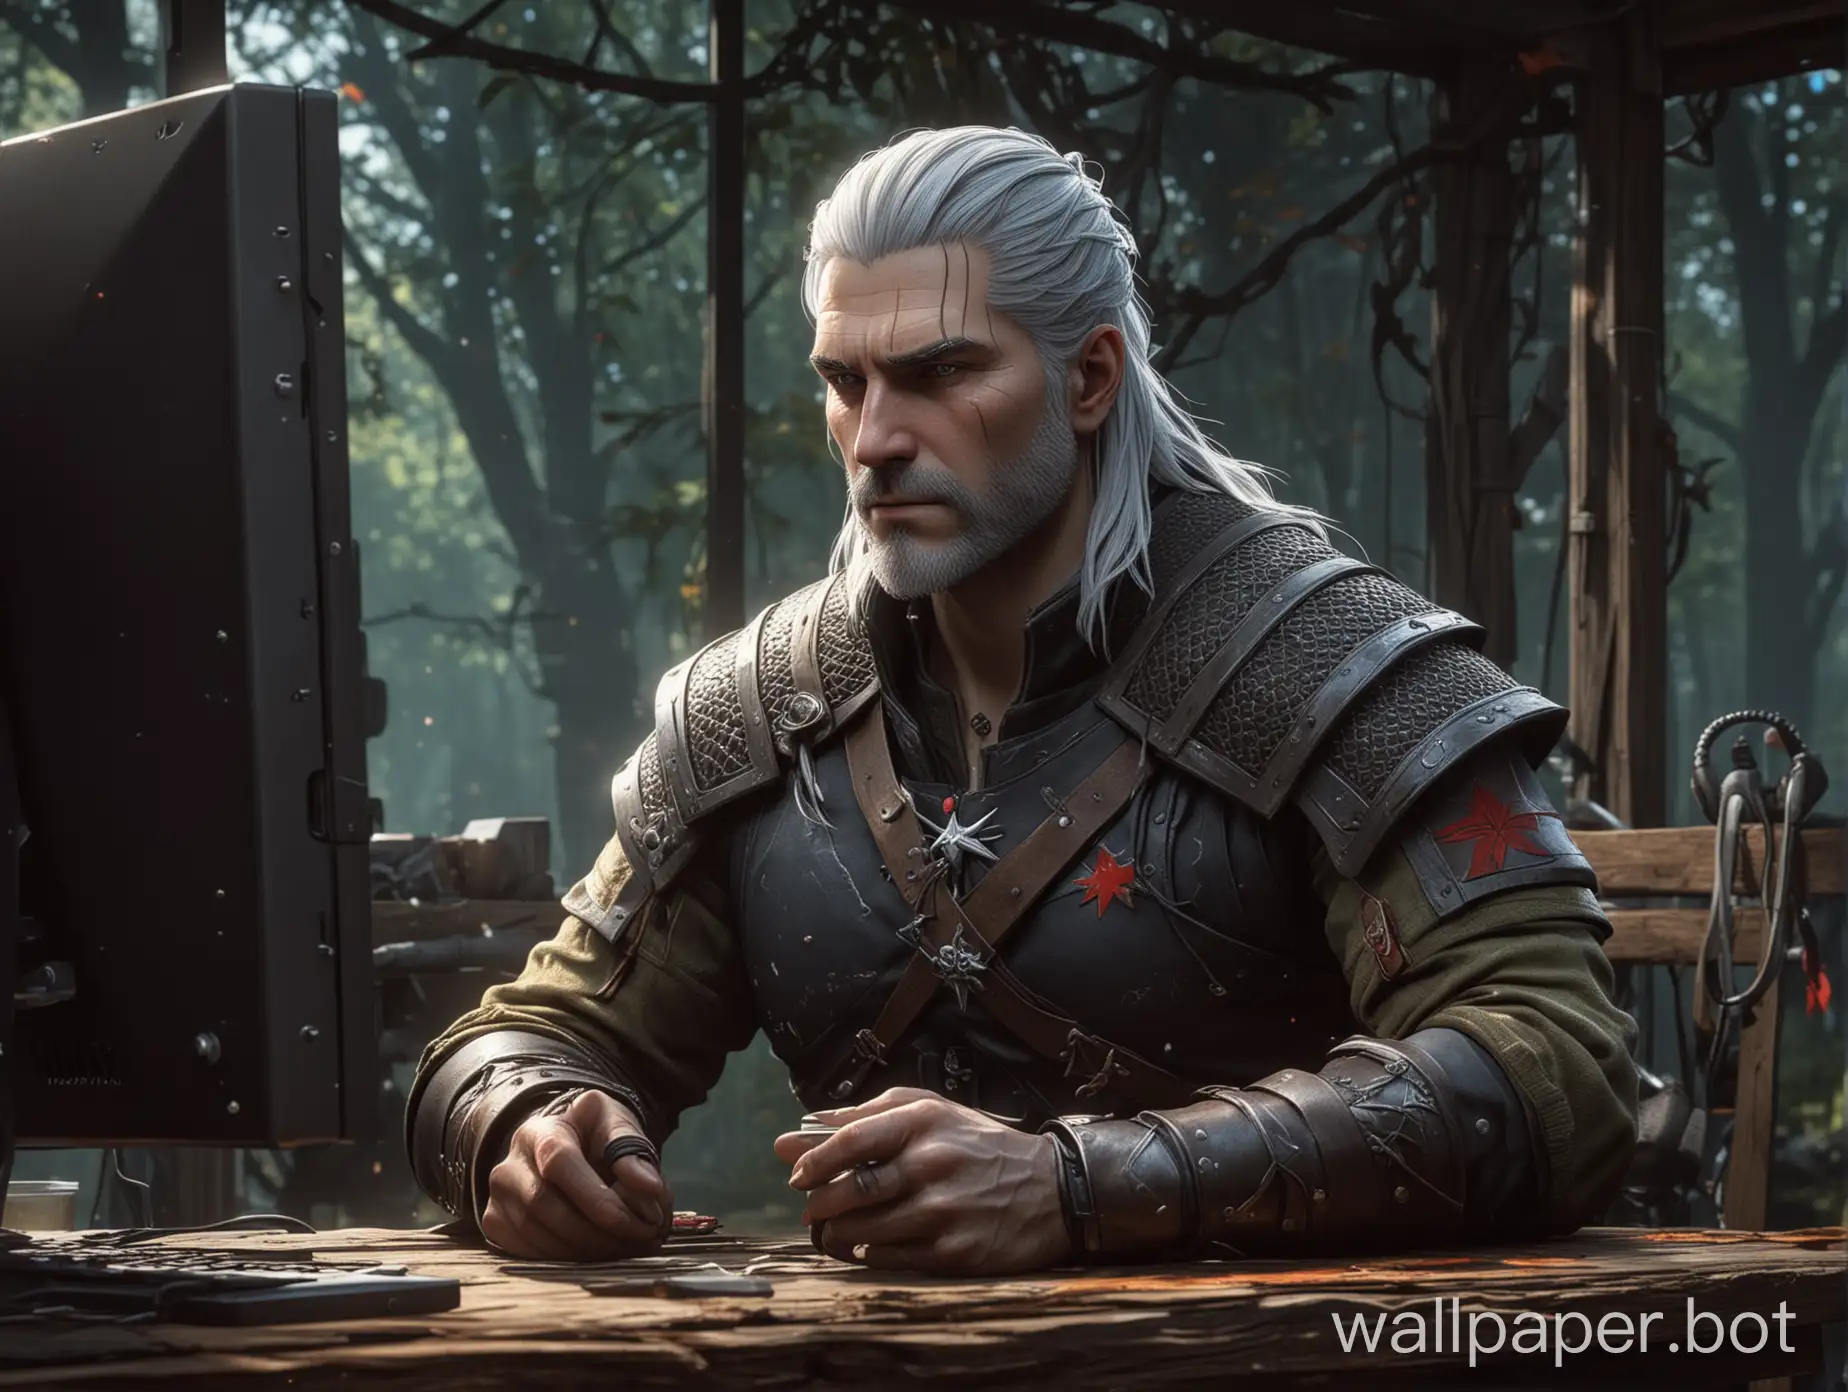 geralt sits at the comp at the monitor and watches anime in hands tea, in ear headphones